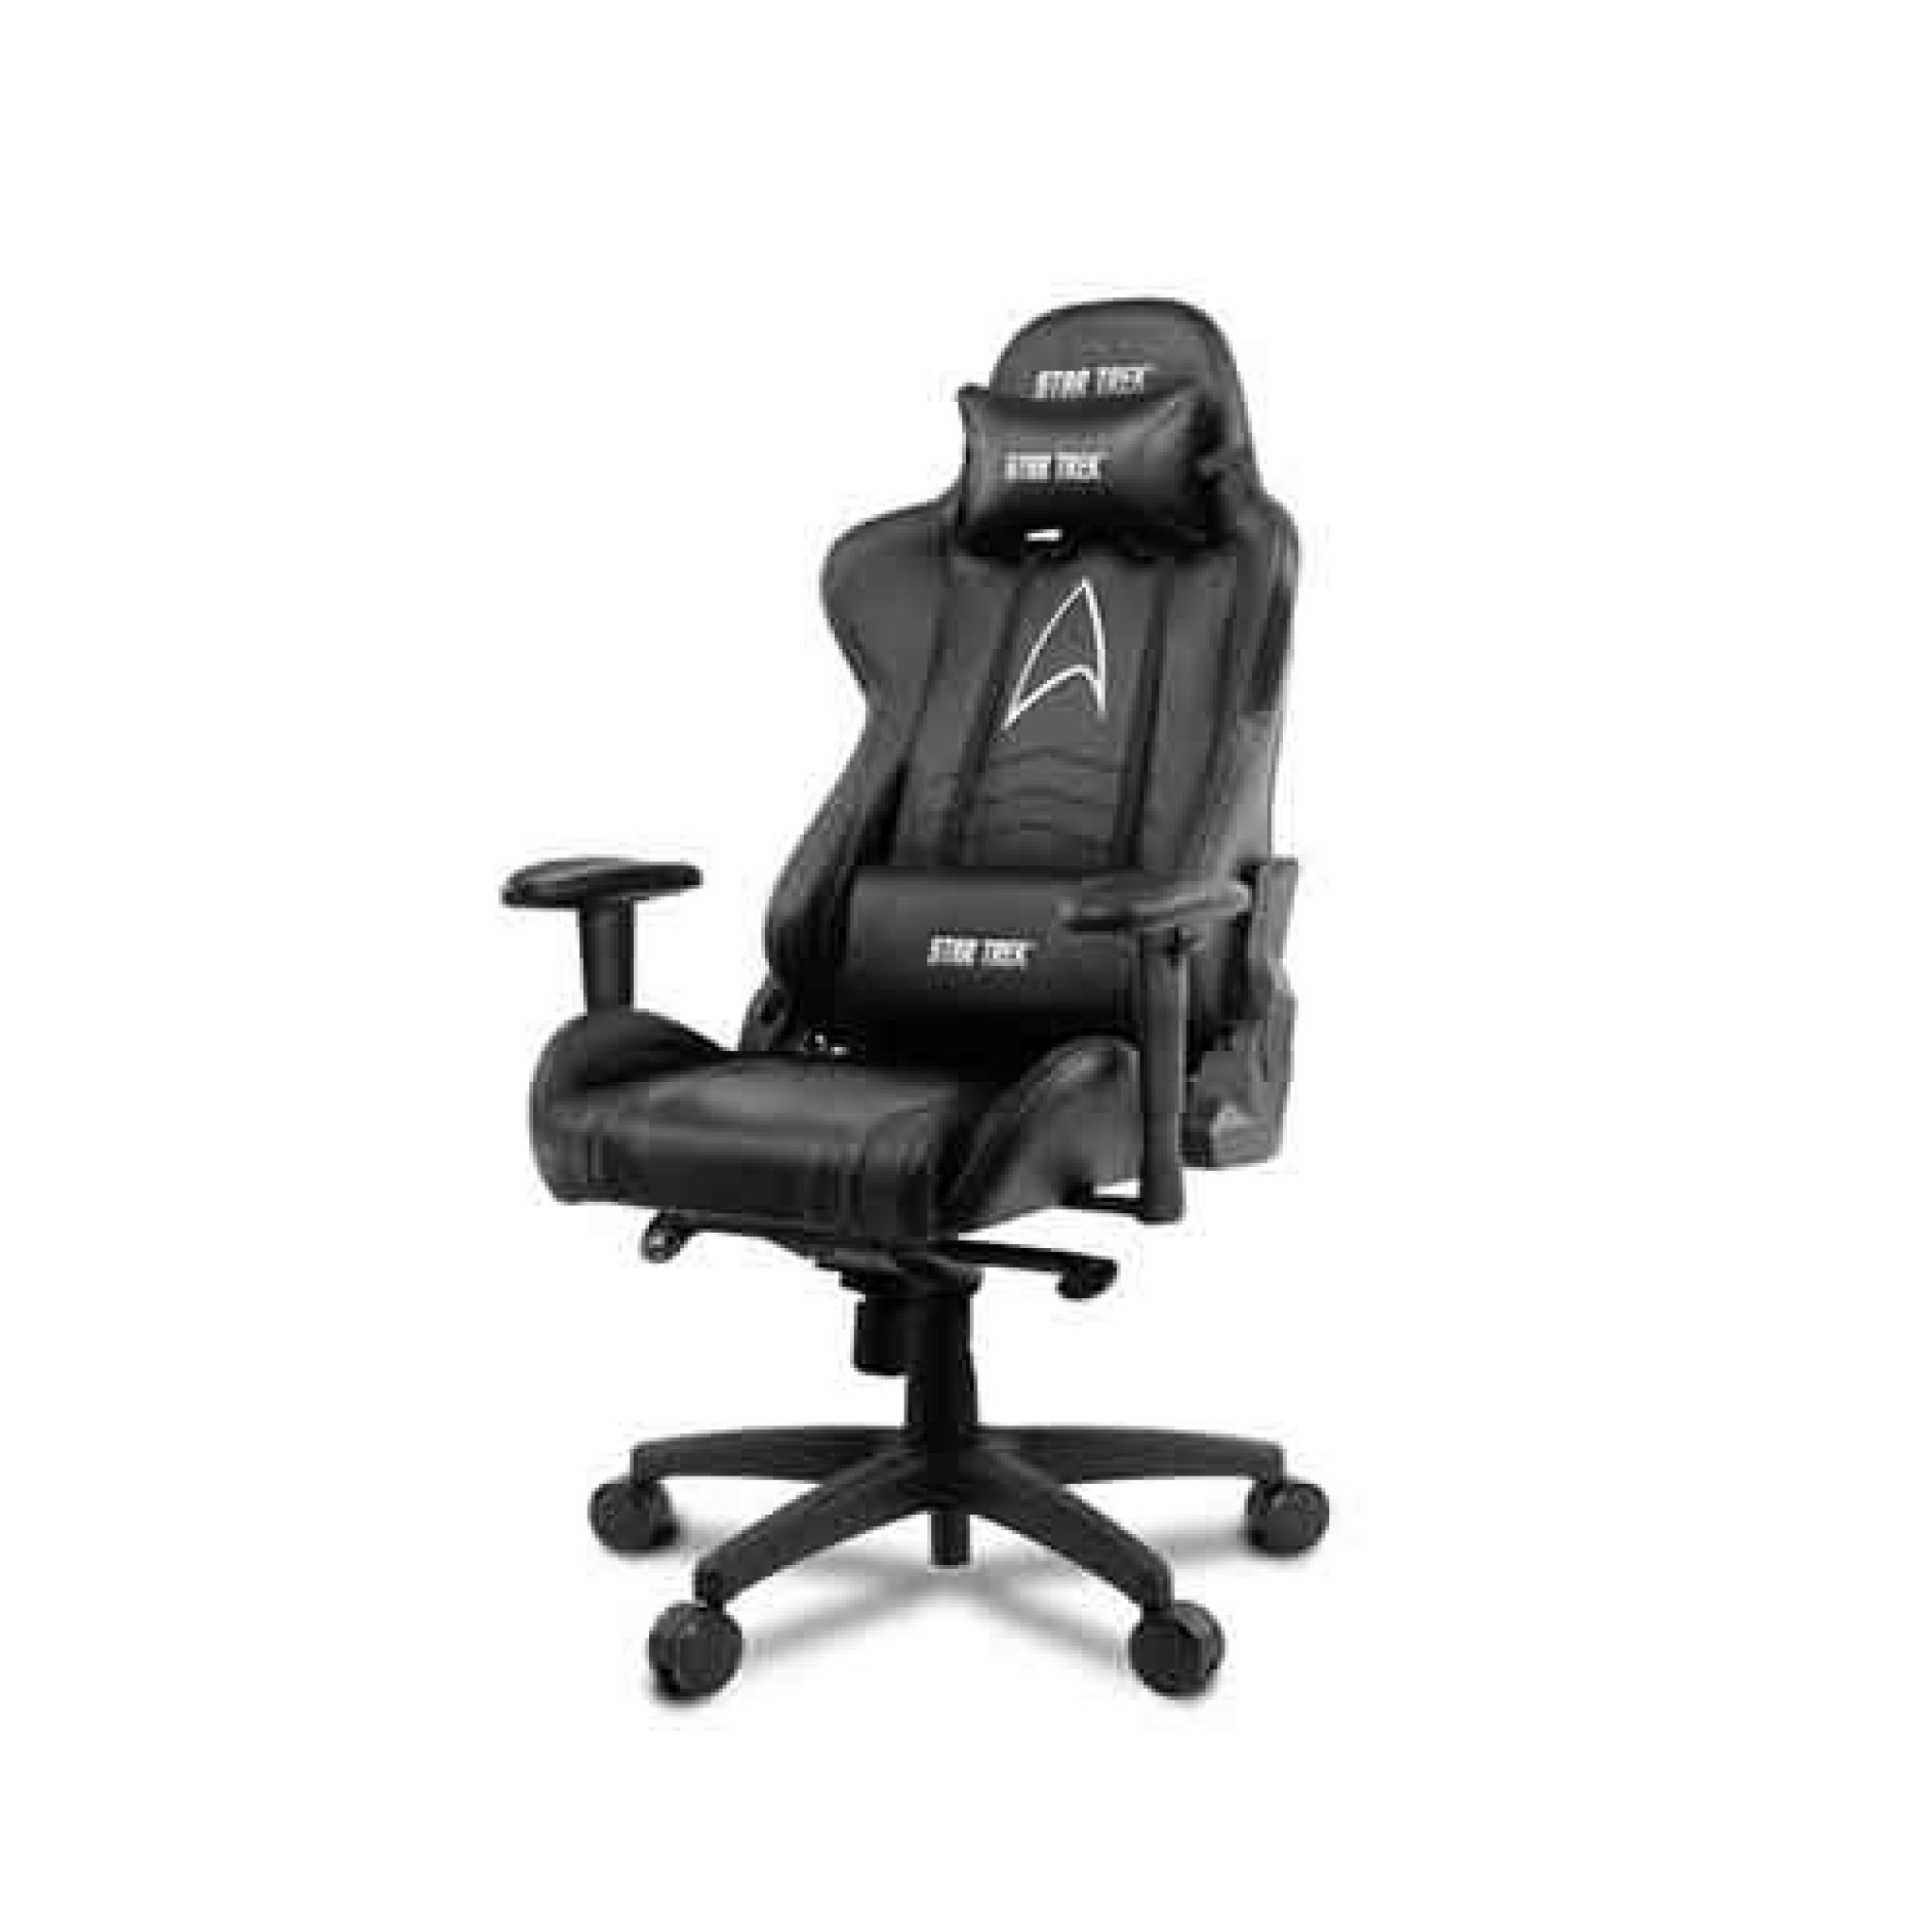 1st Player Gaming Chair Black/Yellow (S01) Price in Pakistan - Compare